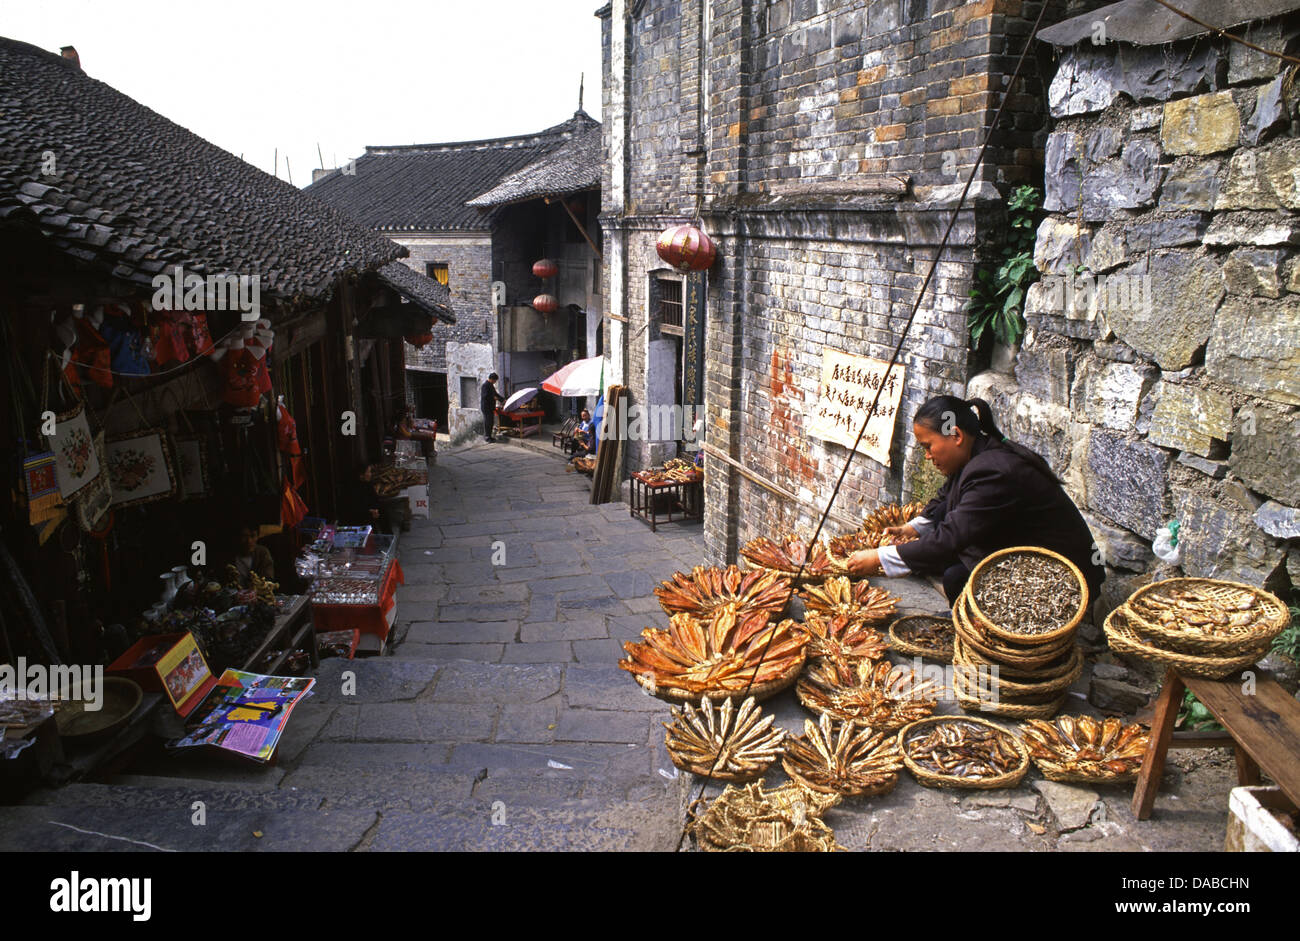 A Chinese fishmonger selling salted and dried fish in the Tujia settlement of Furong zhen village an old town elevated to fame in the 1986 film Hibiscus Town located in Yongshun County, Xiangxi Prefecture, Hunan province China Stock Photo